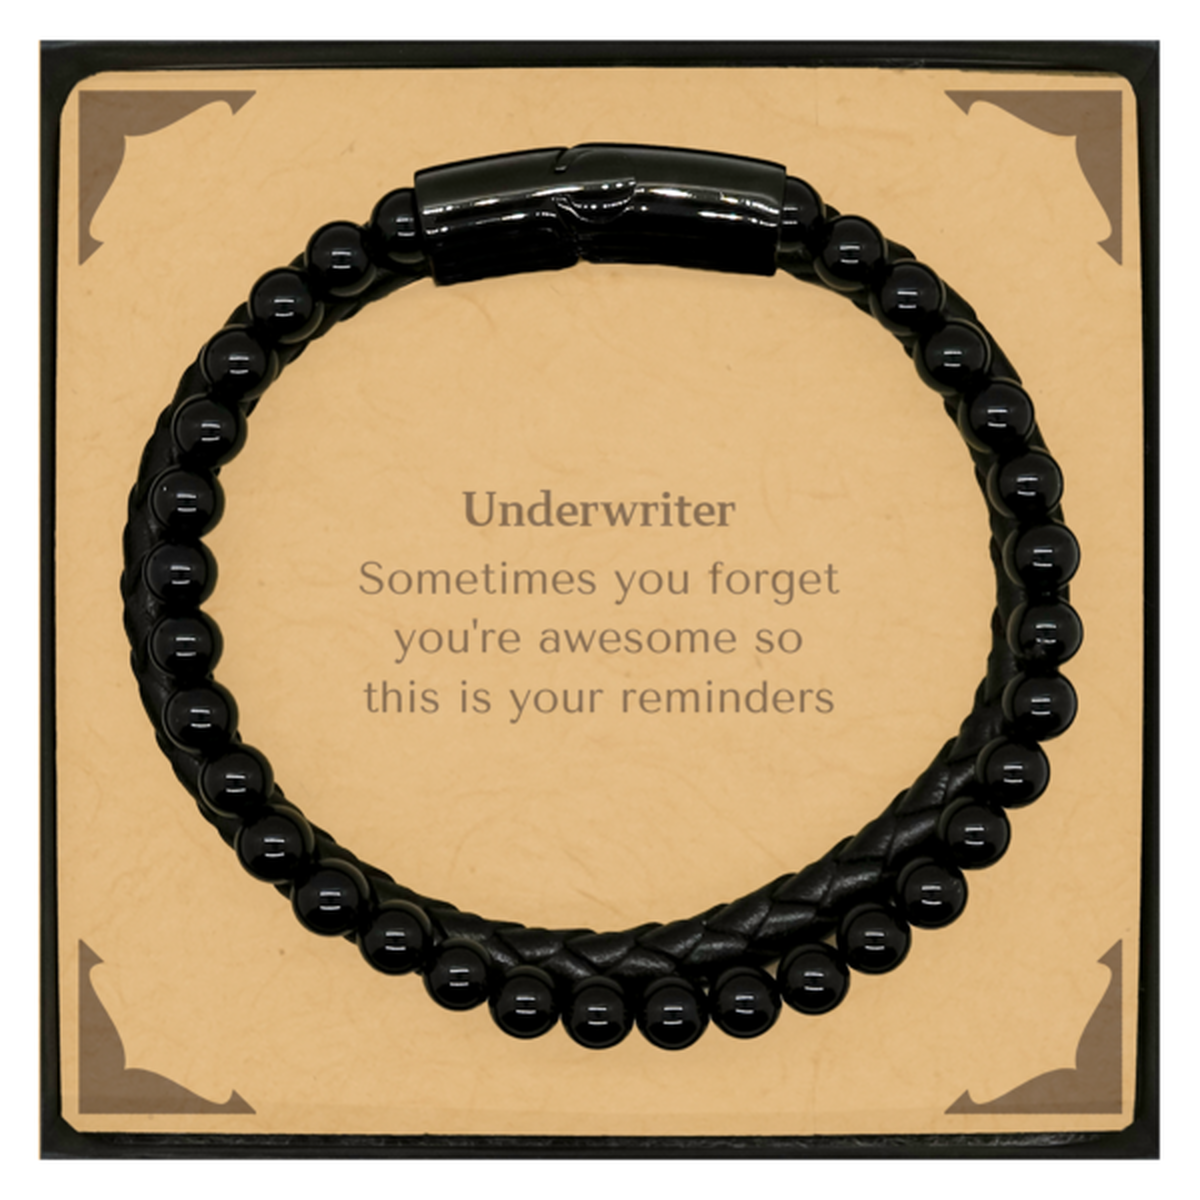 Sentimental Underwriter Stone Leather Bracelets, Underwriter Sometimes you forget you're awesome so this is your reminders, Graduation Christmas Birthday Gifts for Underwriter, Men, Women, Coworkers